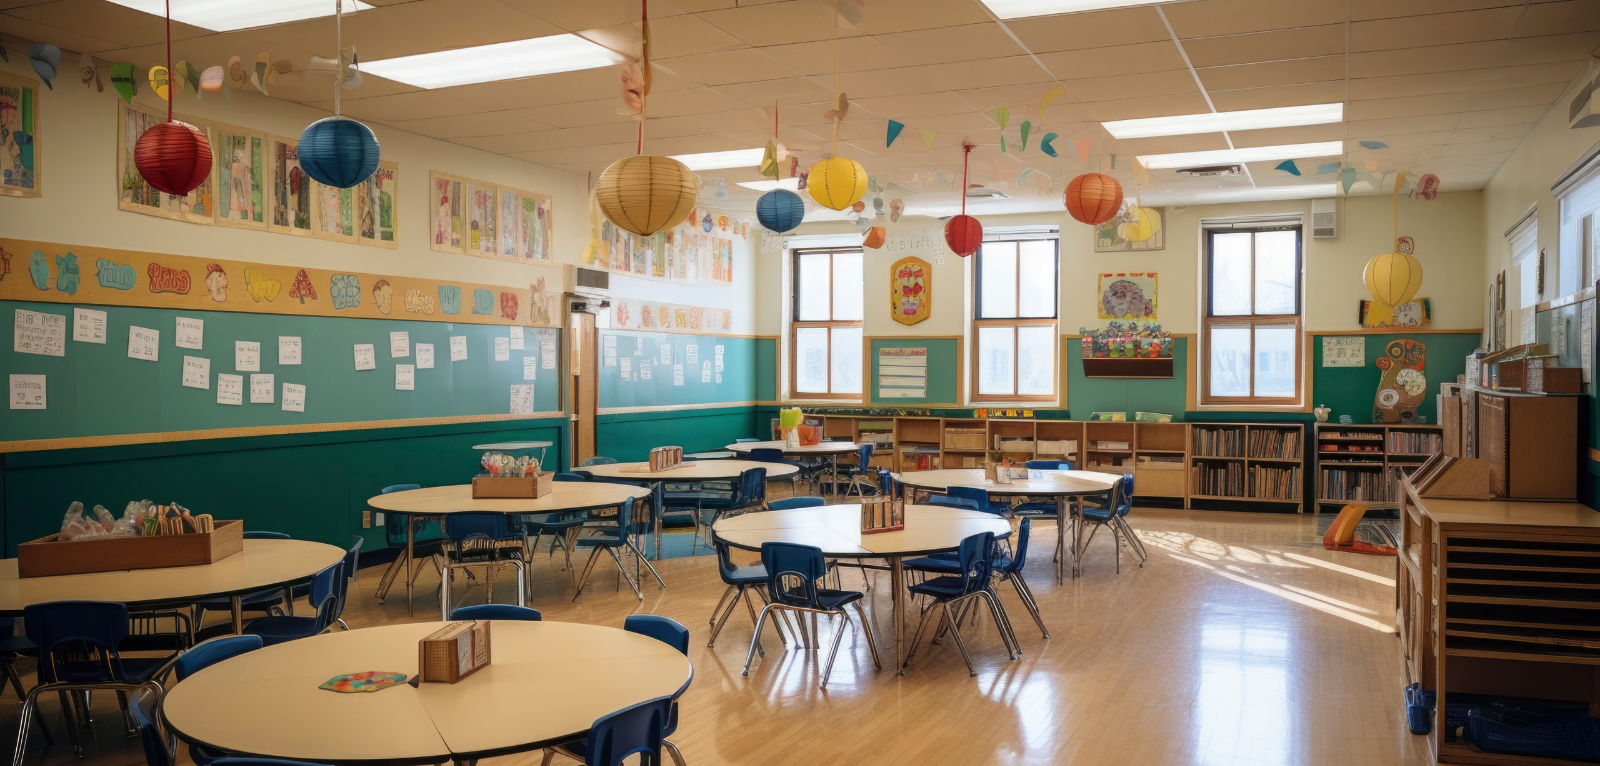 Classroom with desks and colorful decor on walls and hanging from the ceiling